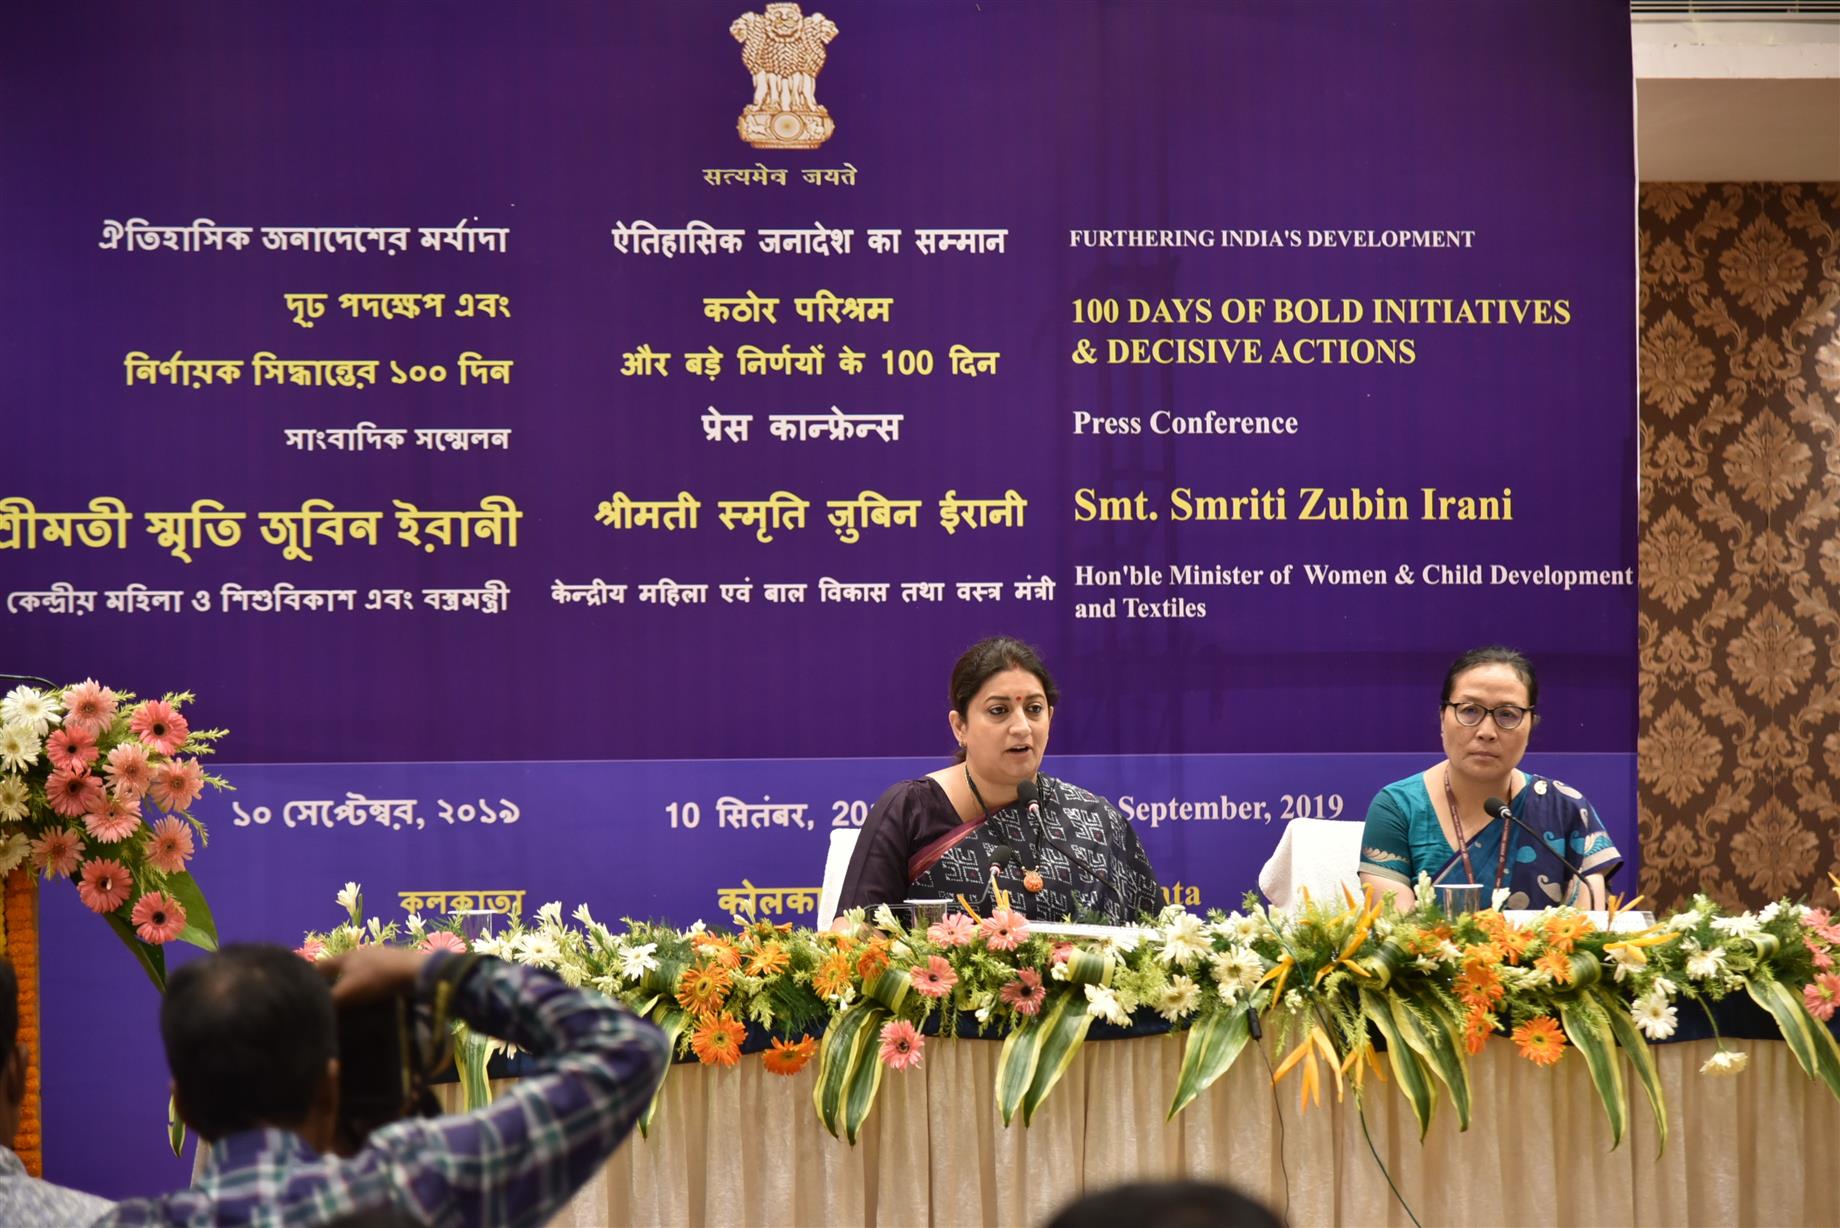 Union Minister for Women and Child Development and Textiles, Smt Smriti Zubin Irani addressing the press conference on 100 days of Bold Initiatives and Decisive Actions taken by the Central Government in Kolkata on September 10, 2019.